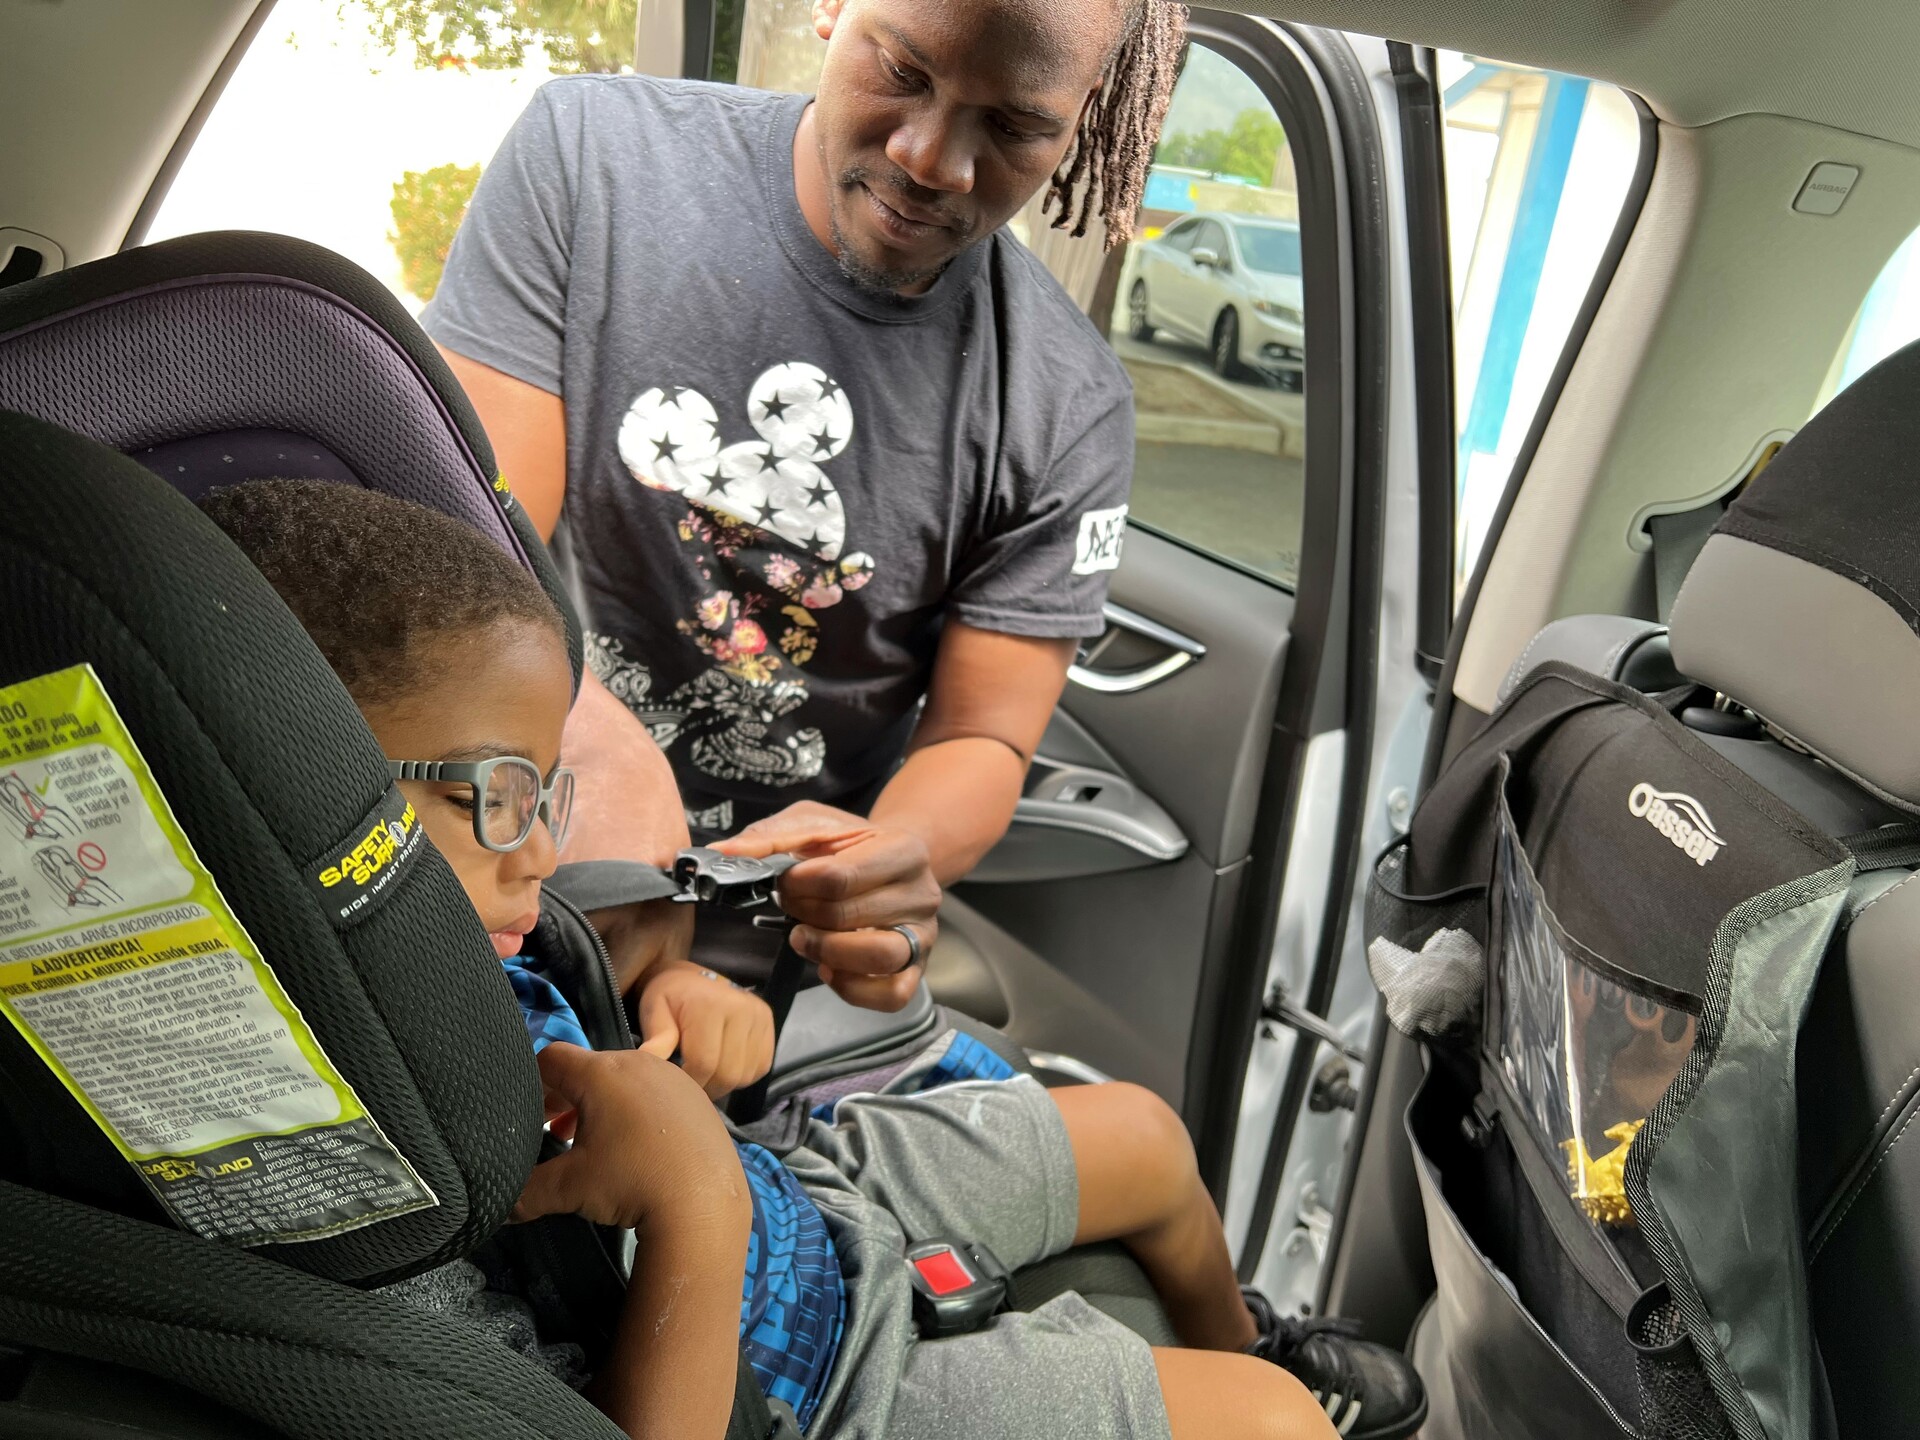 A man is putting a child into a car seat.